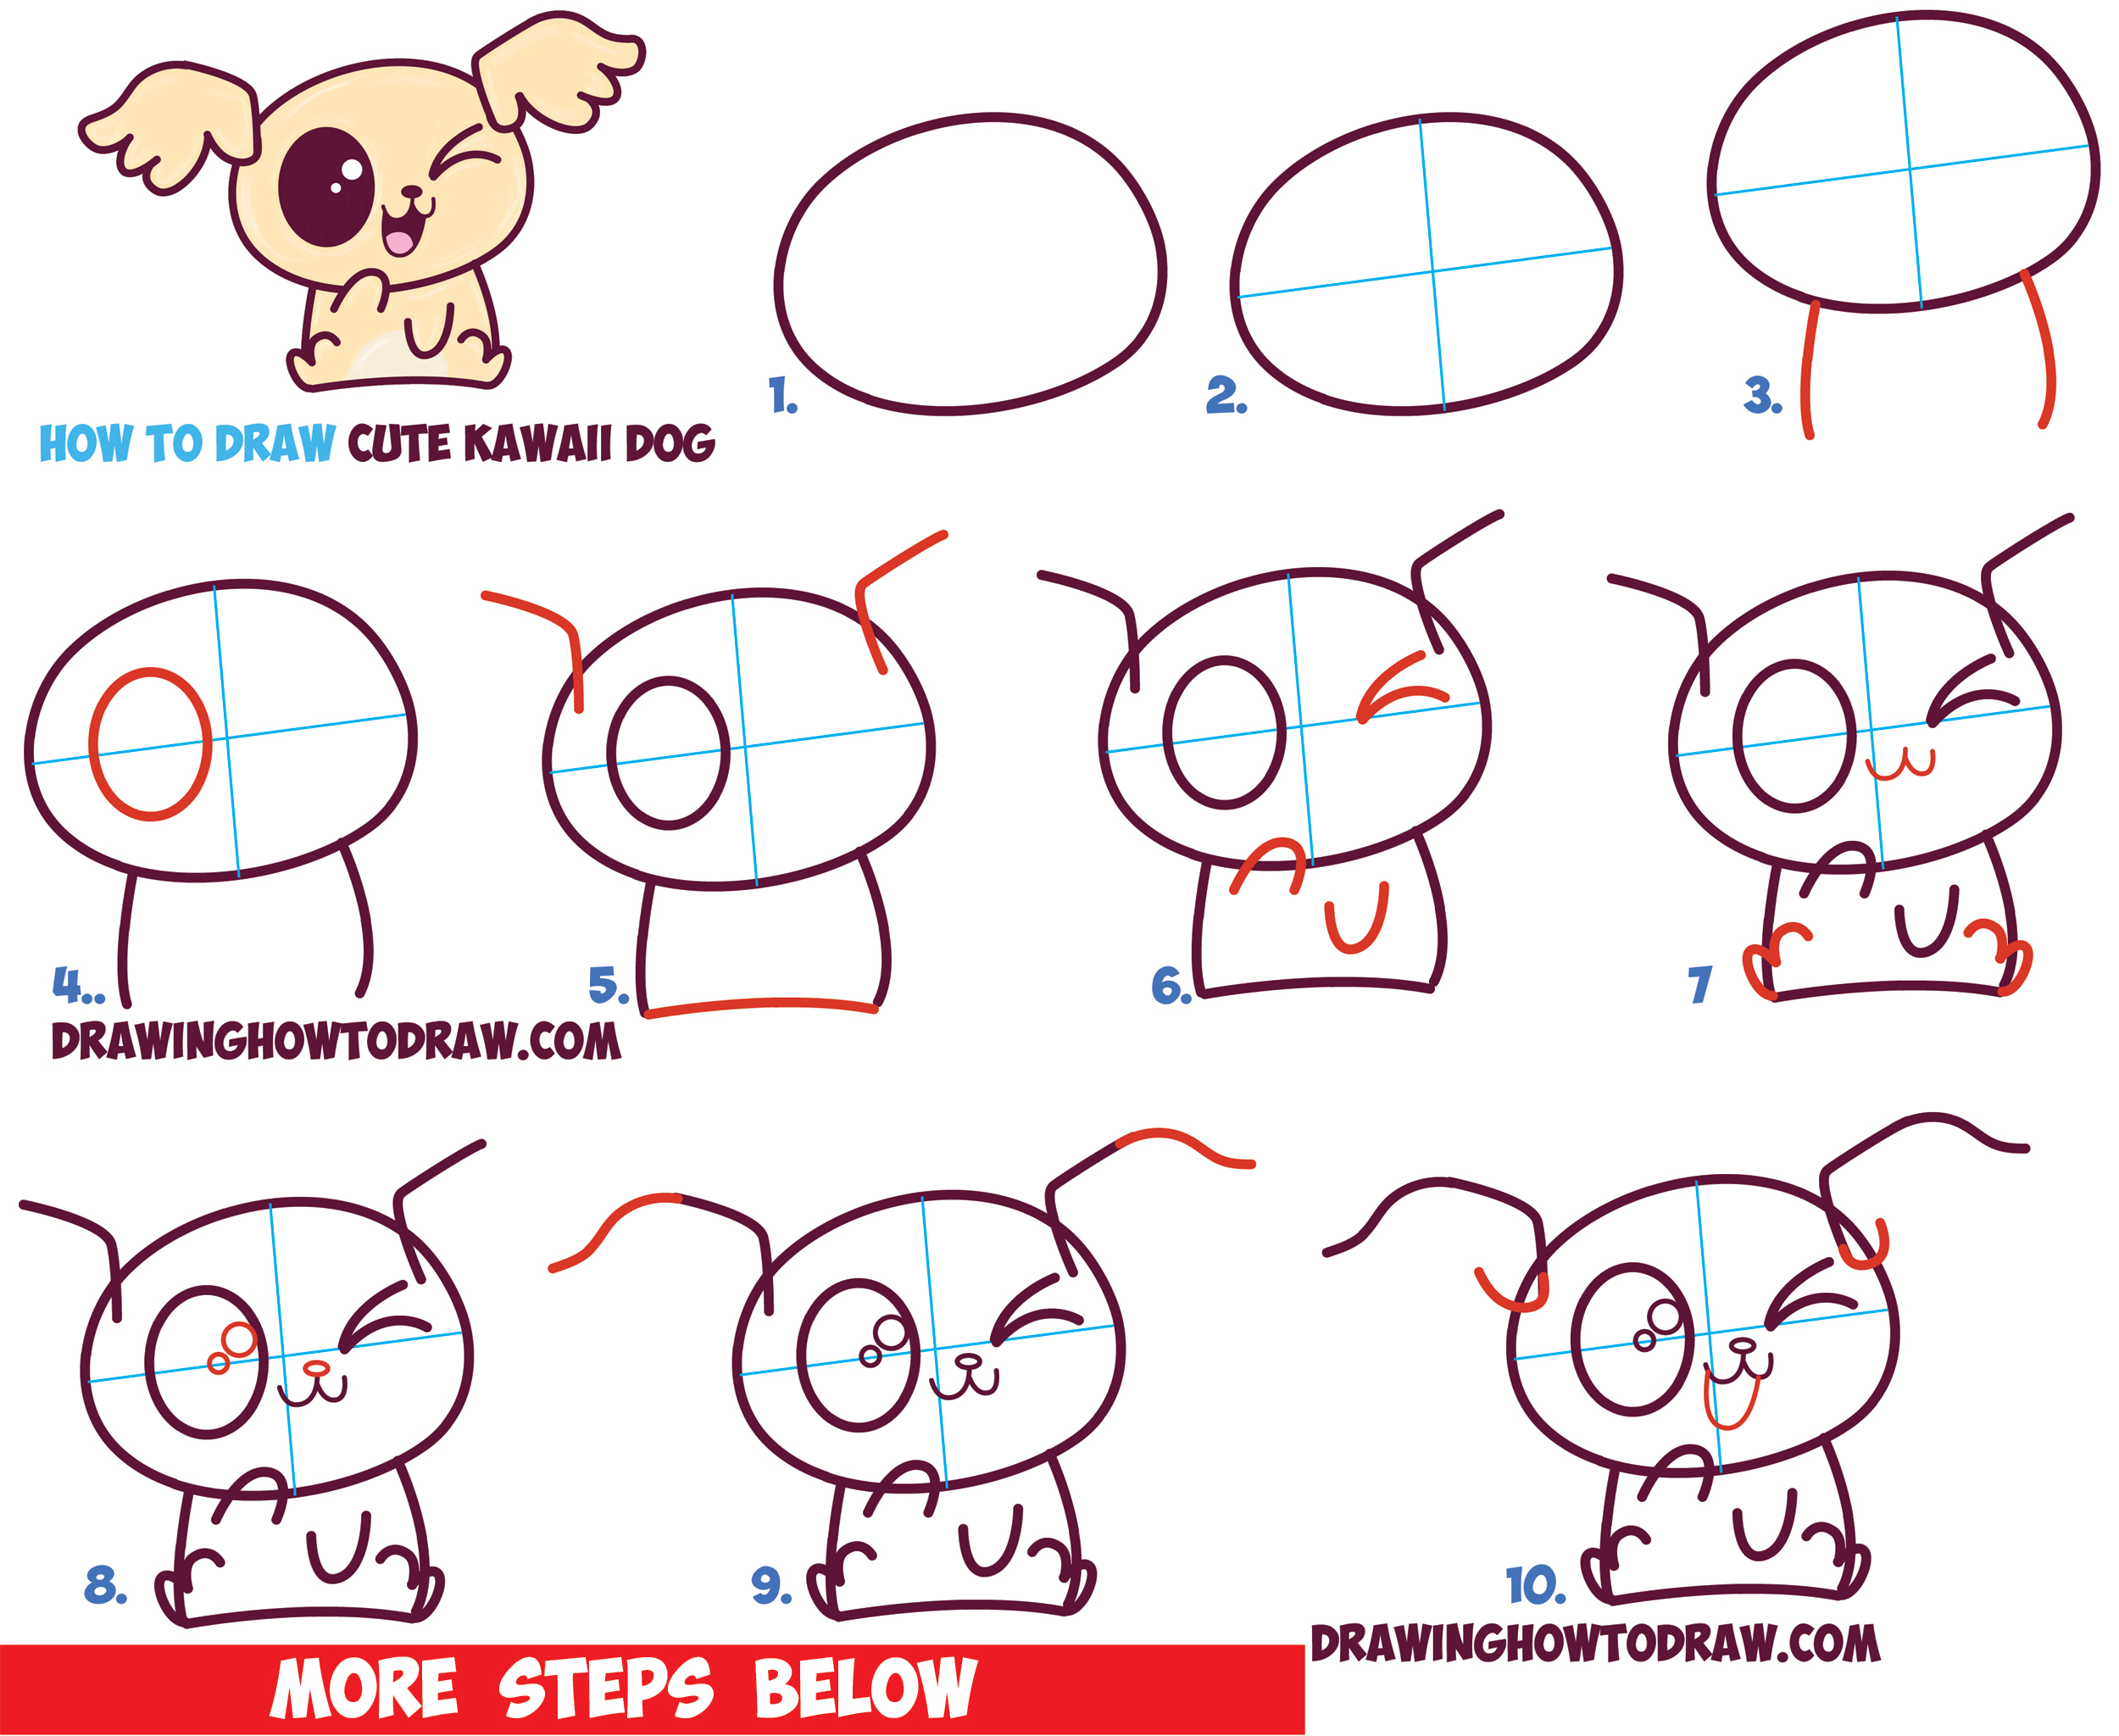 How to Draw Cute Kawaii / Chibi Puppy Dogs with Easy Step by Step